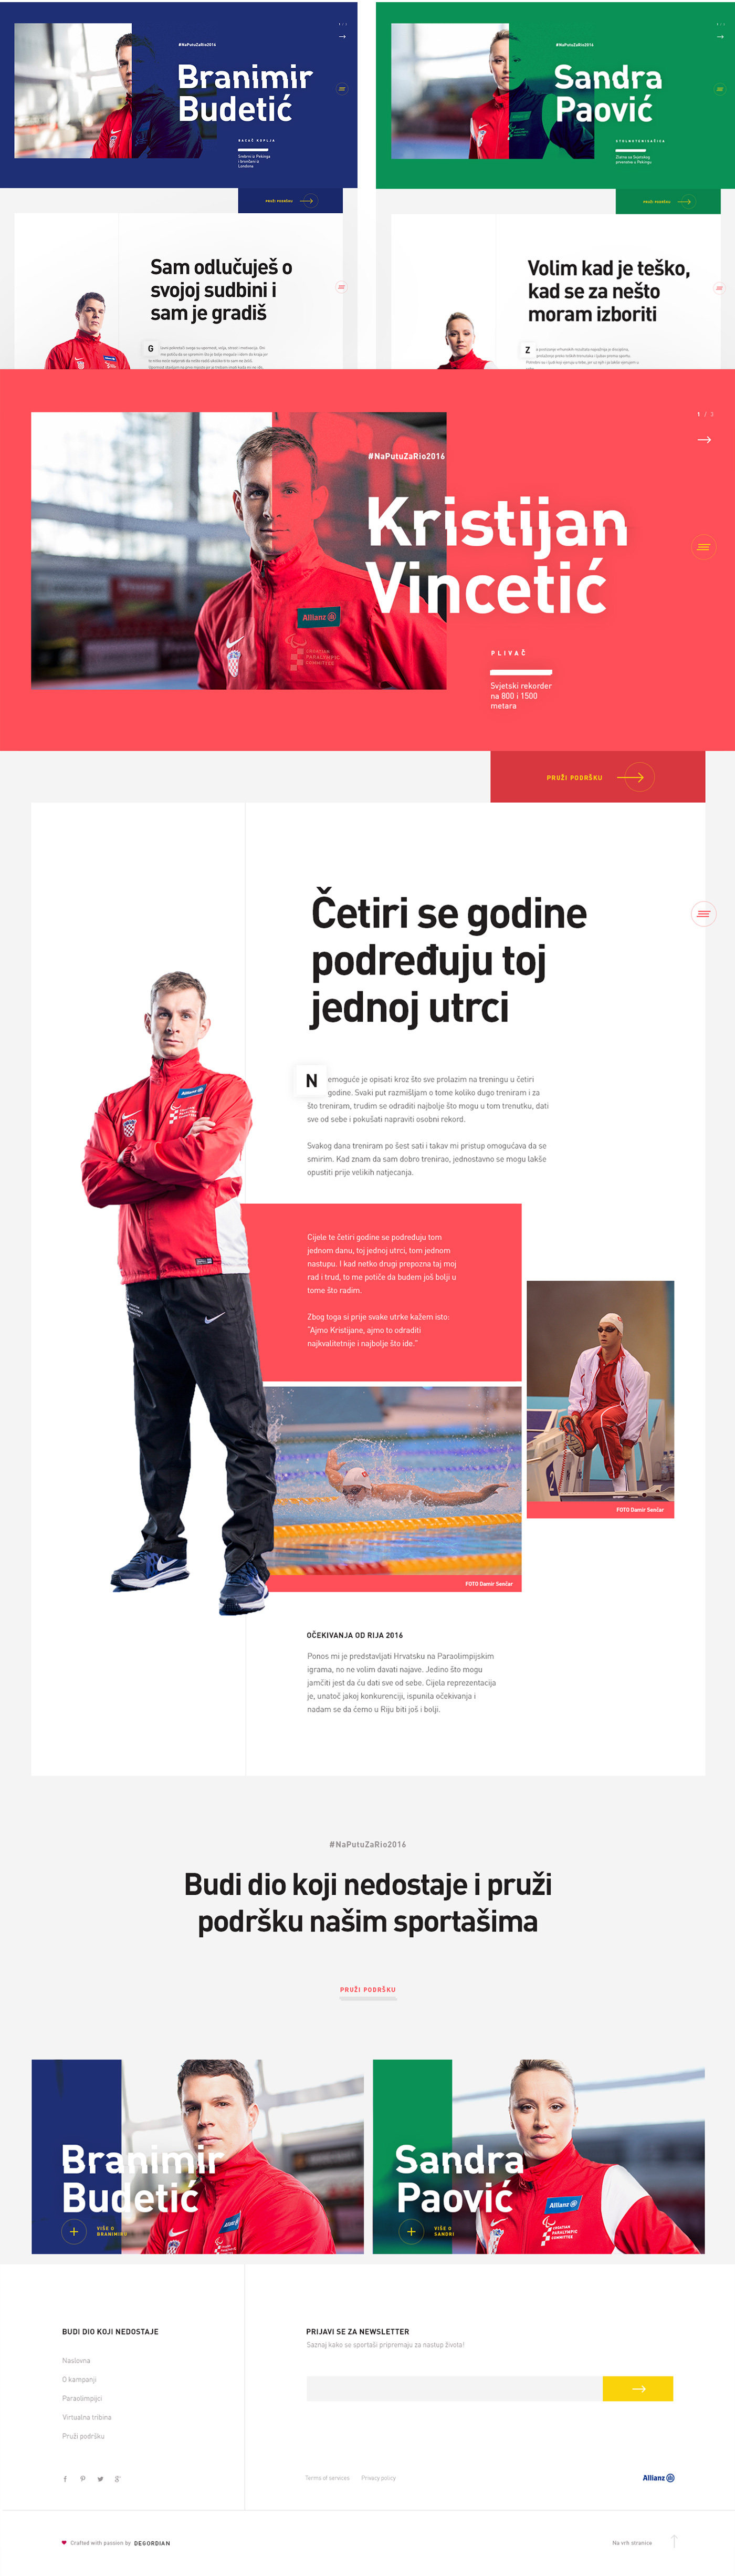 Website digital interactive Responsive rio 2016 visual paralympic Olympic Games